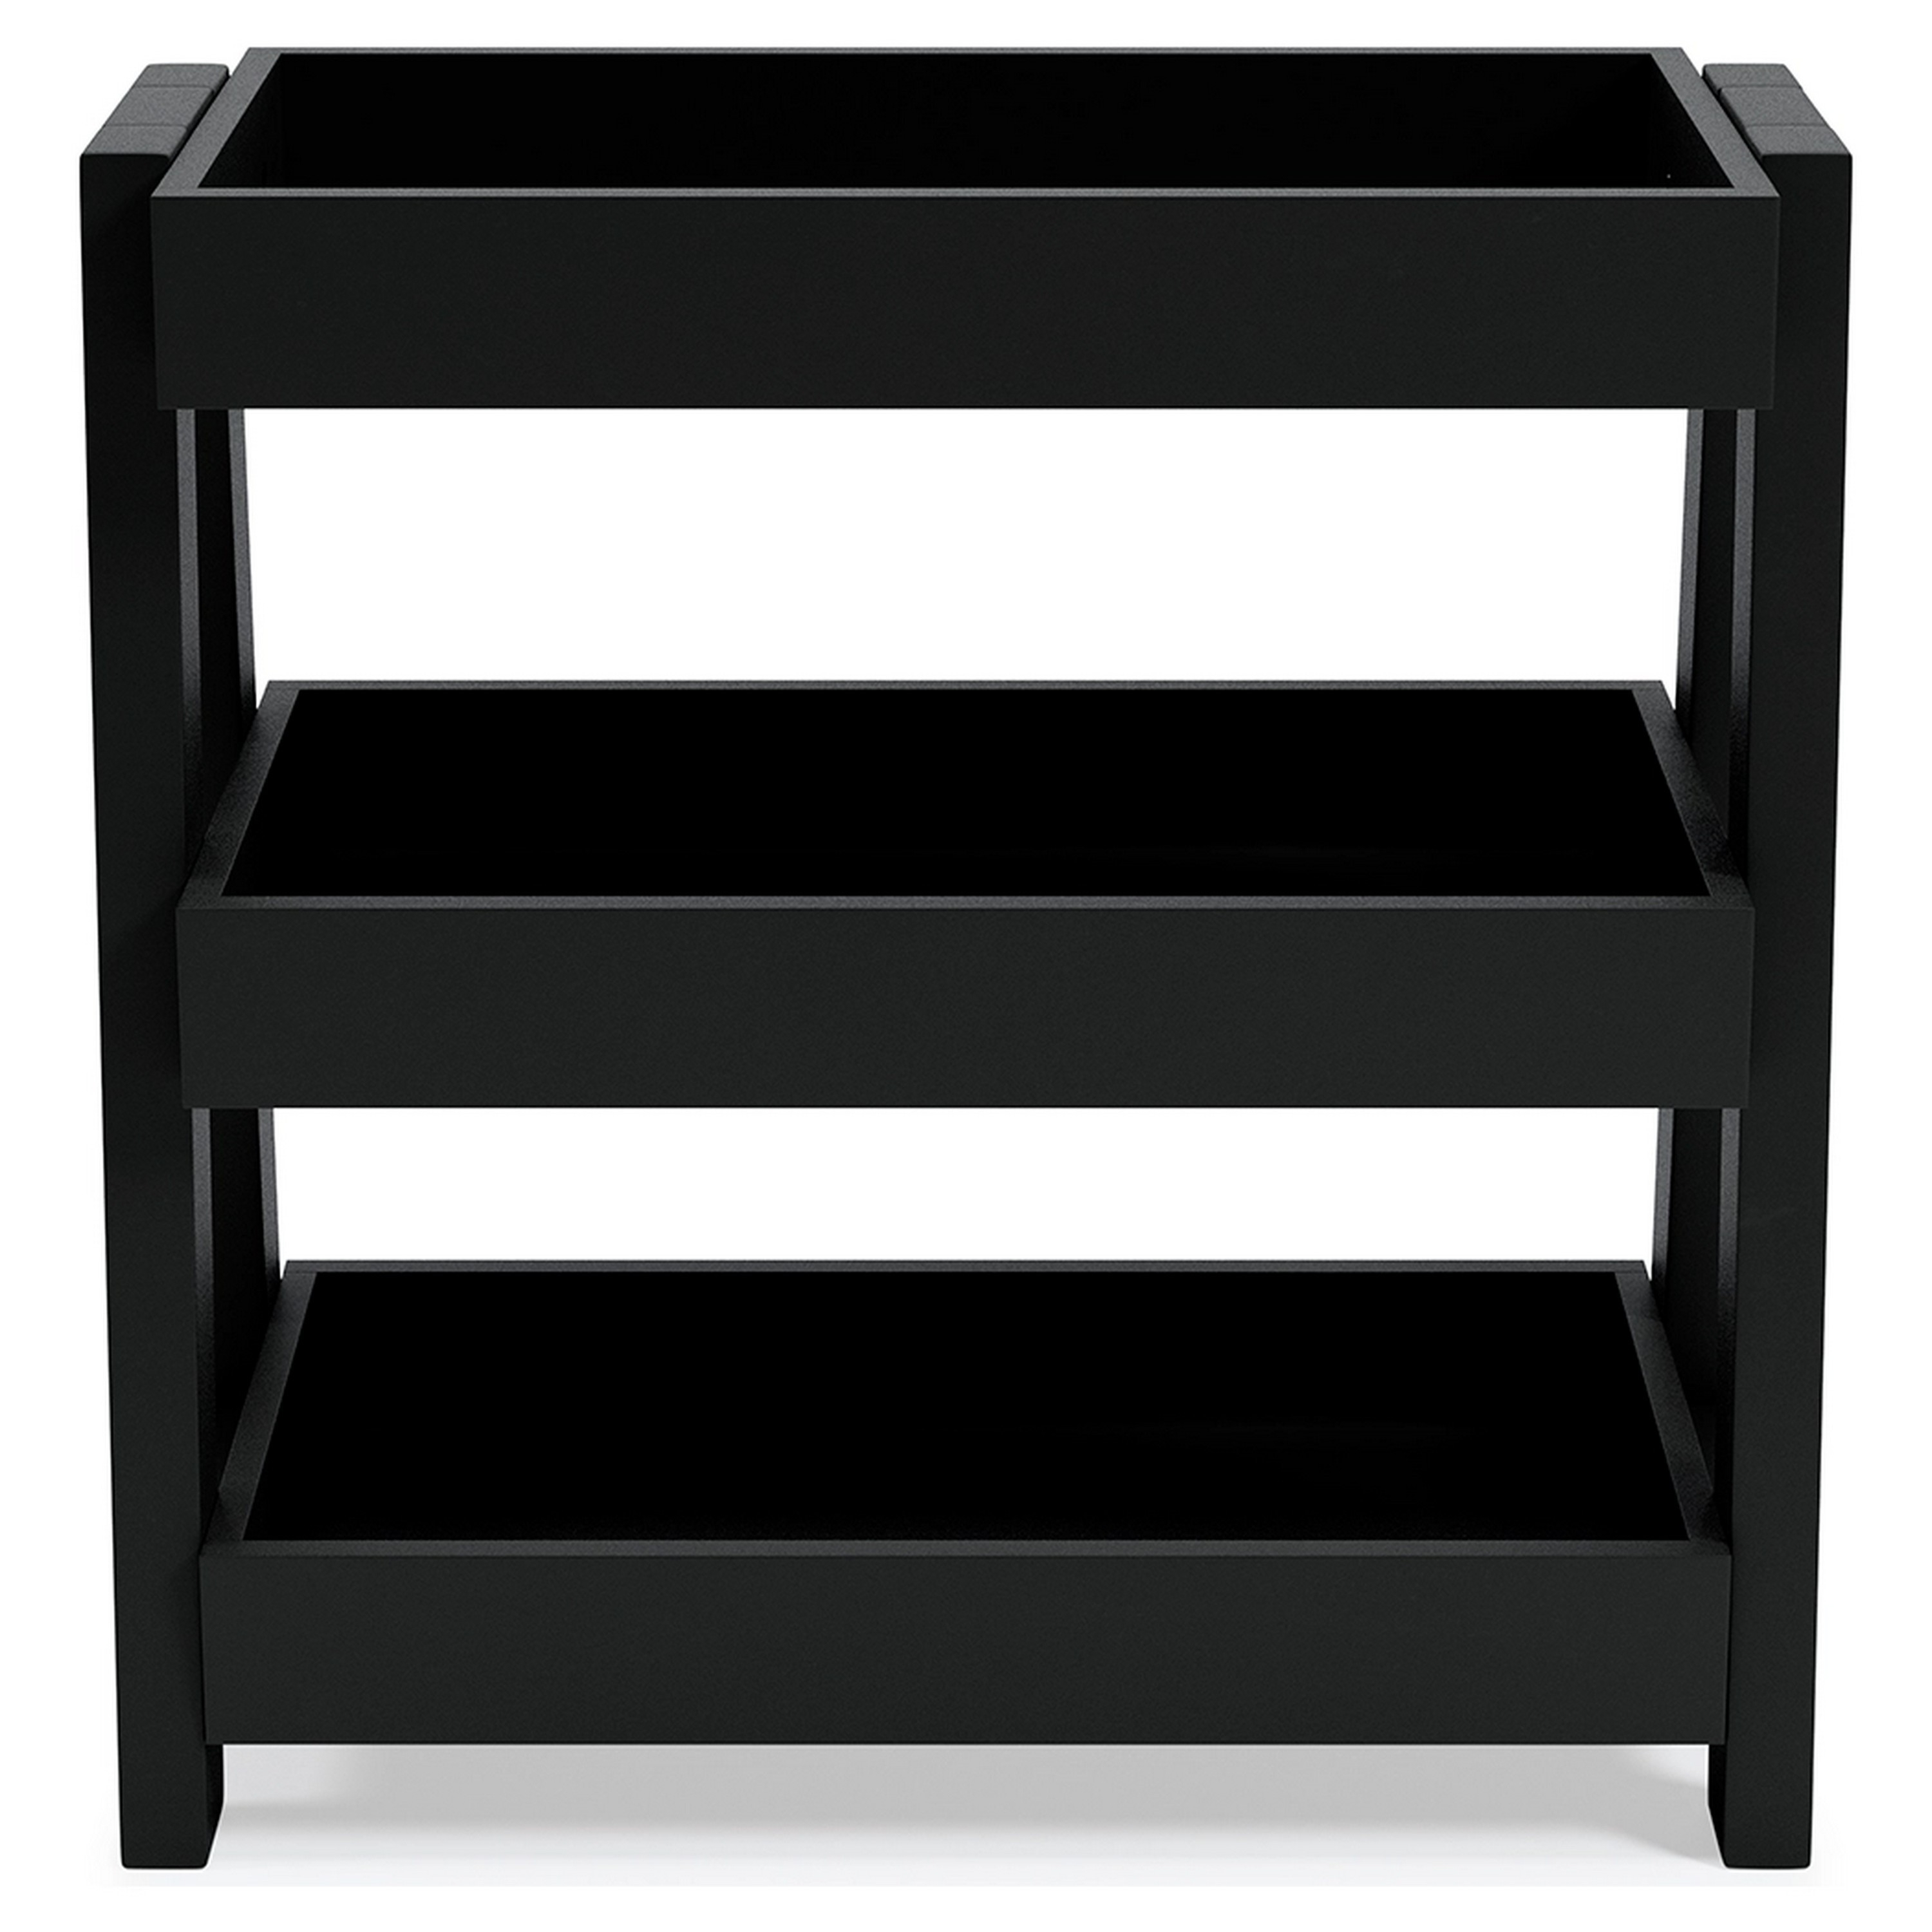 Accent Table With 3 Tier Tray Design Shelves, Black- Saltoro Sherpi